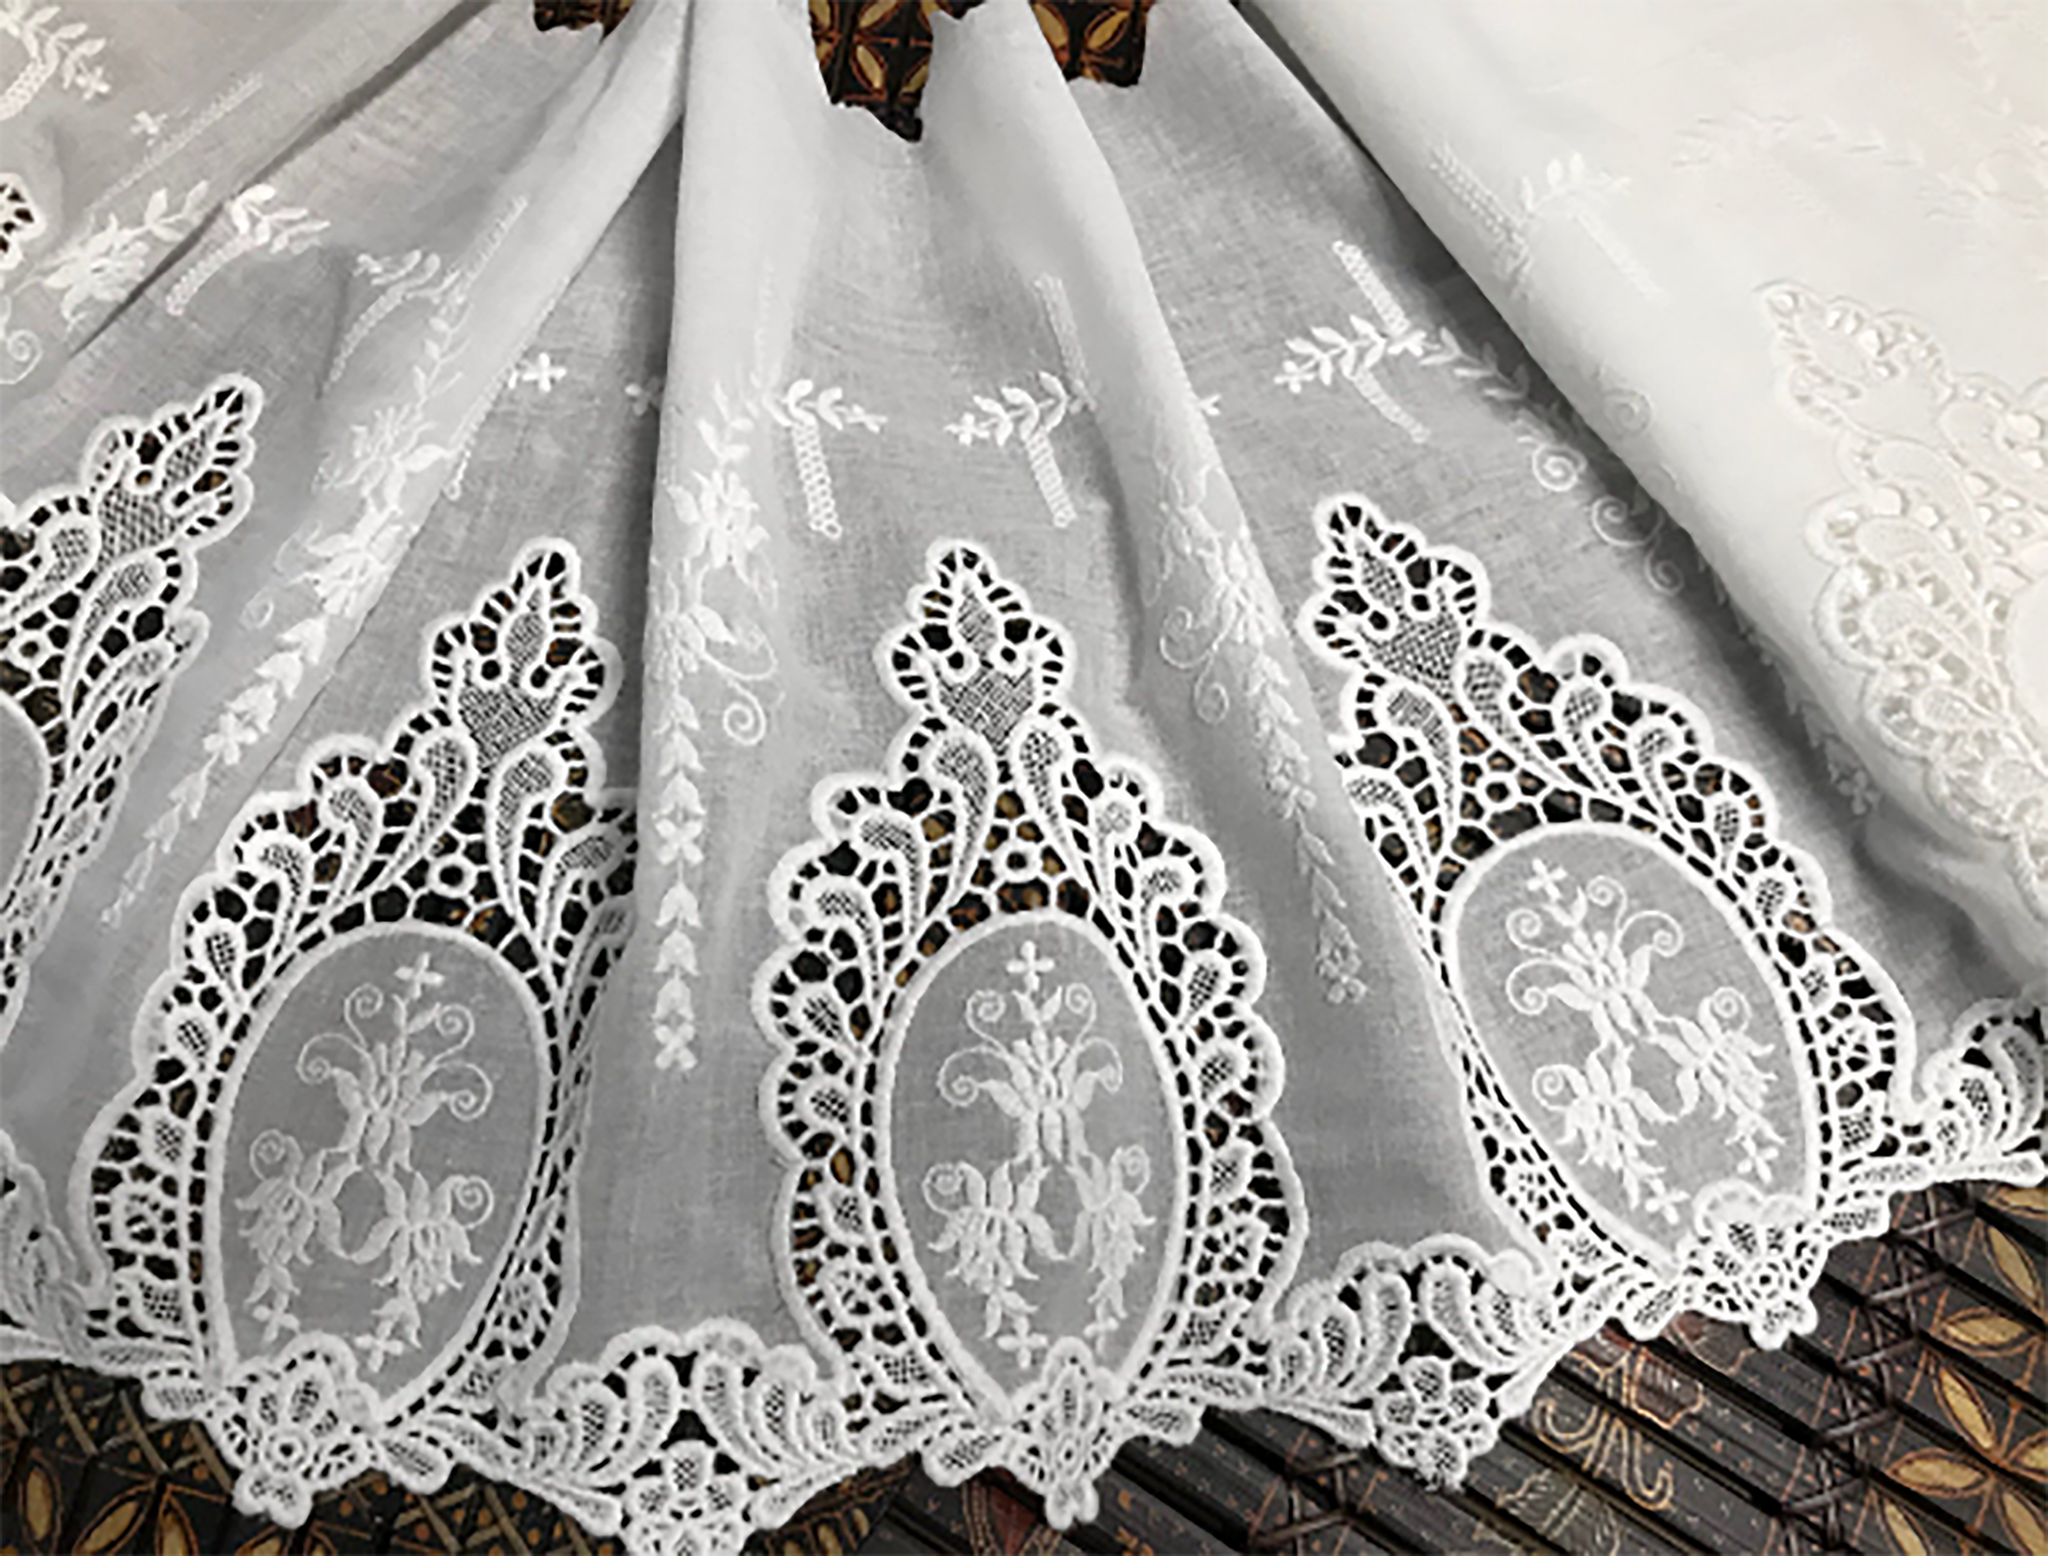 Natural White Medallions Pattern embroidered   Lace  on Natural White Cotton Voile - 35 cm Wide